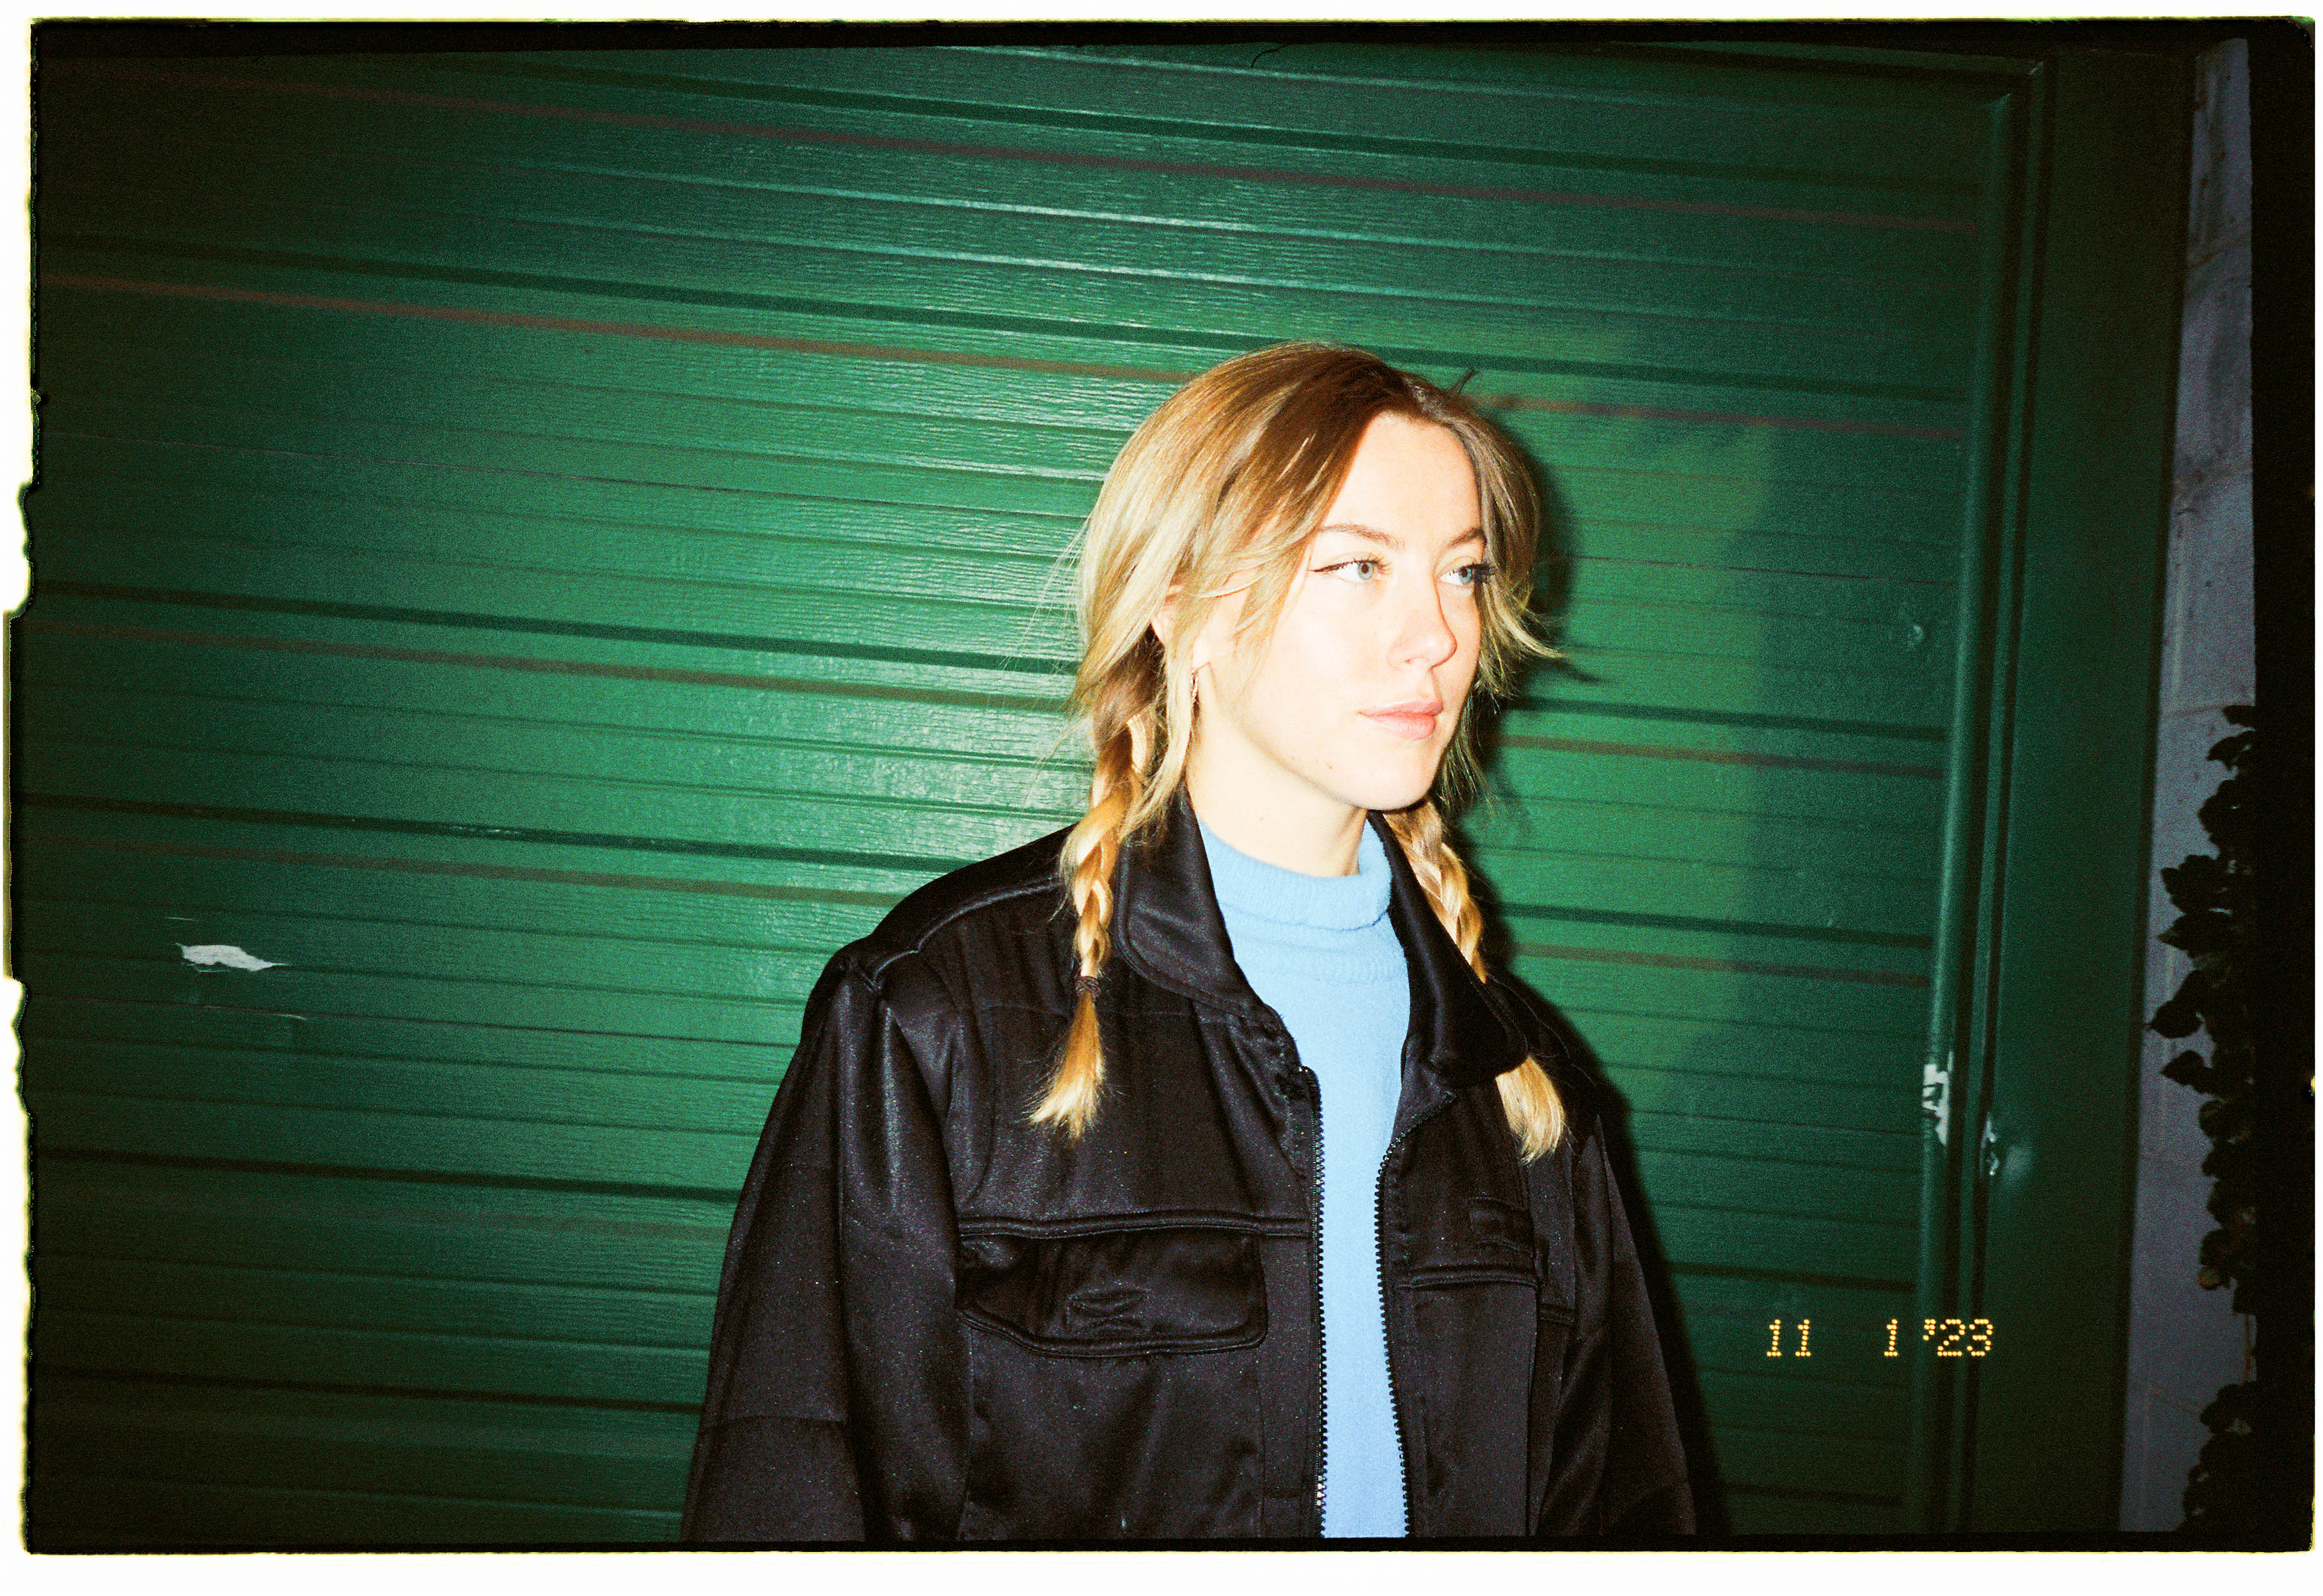 Josephine’s ‘Leaning’ EP Follows An Emotional And Personal Arc